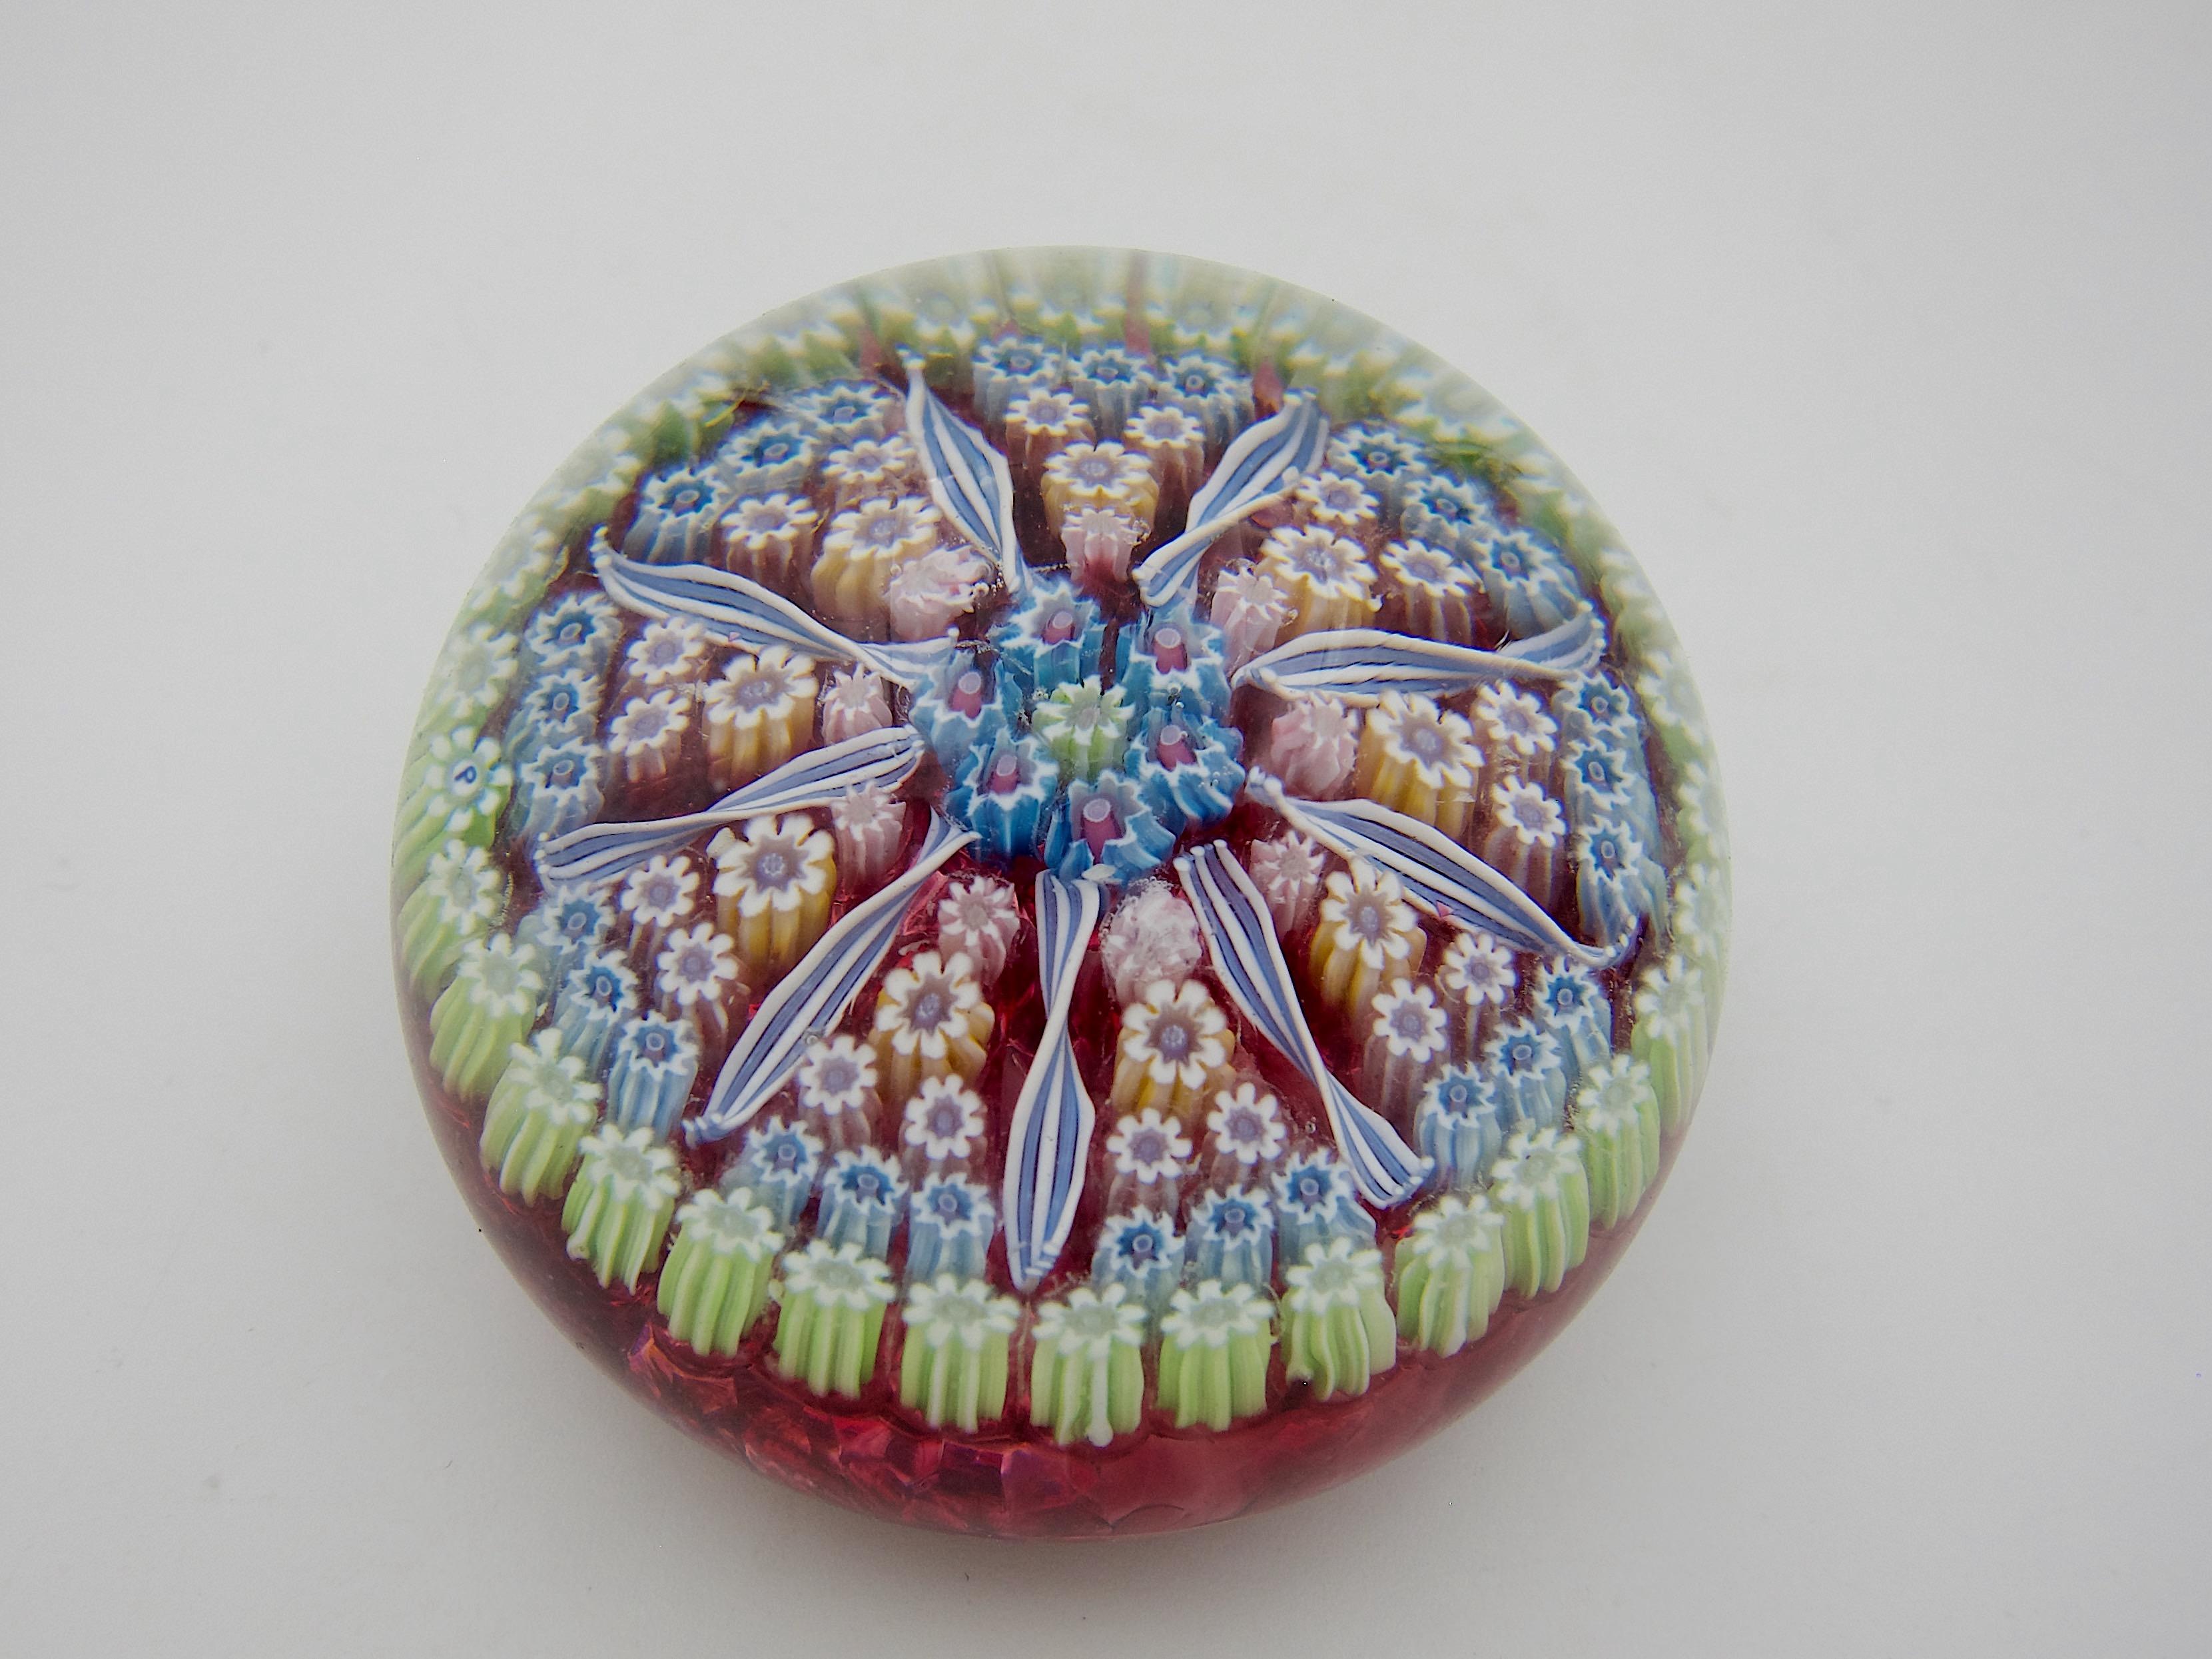 A vintage millefiori art glass paperweight, handcrafted by Perthshire Paperweights, Ltd. of Crieff, Scotland and dating to the last quarter of the 20th century. The domed weight was designed in a 1-1-2-3 pattern of millefiori canes separated by 9